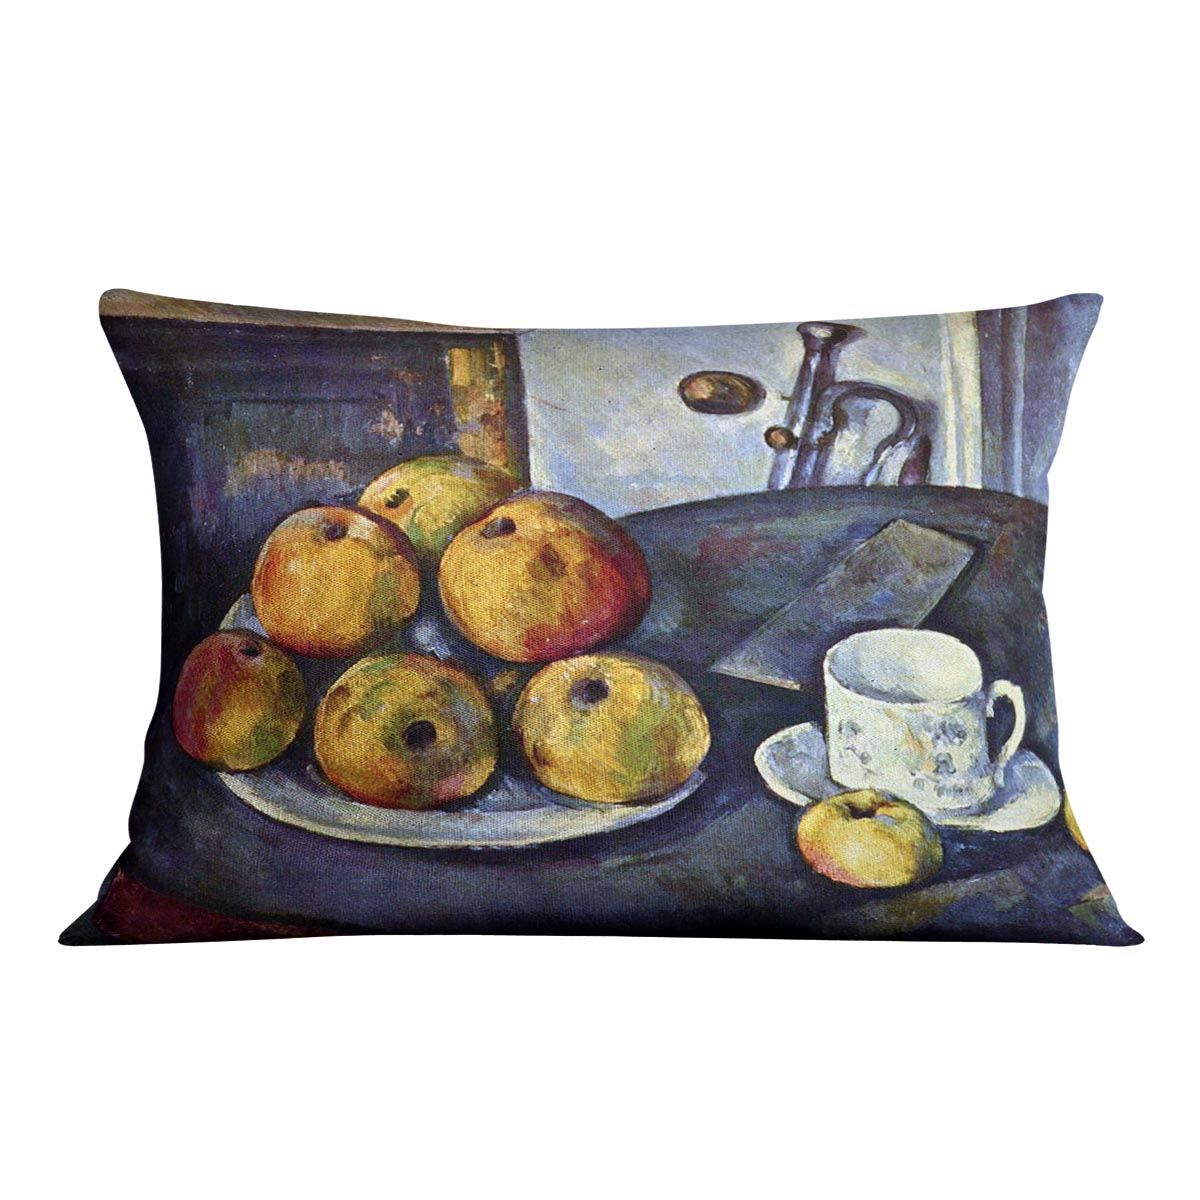 Still life with a bottle and apple cart by Cezanne Cushion